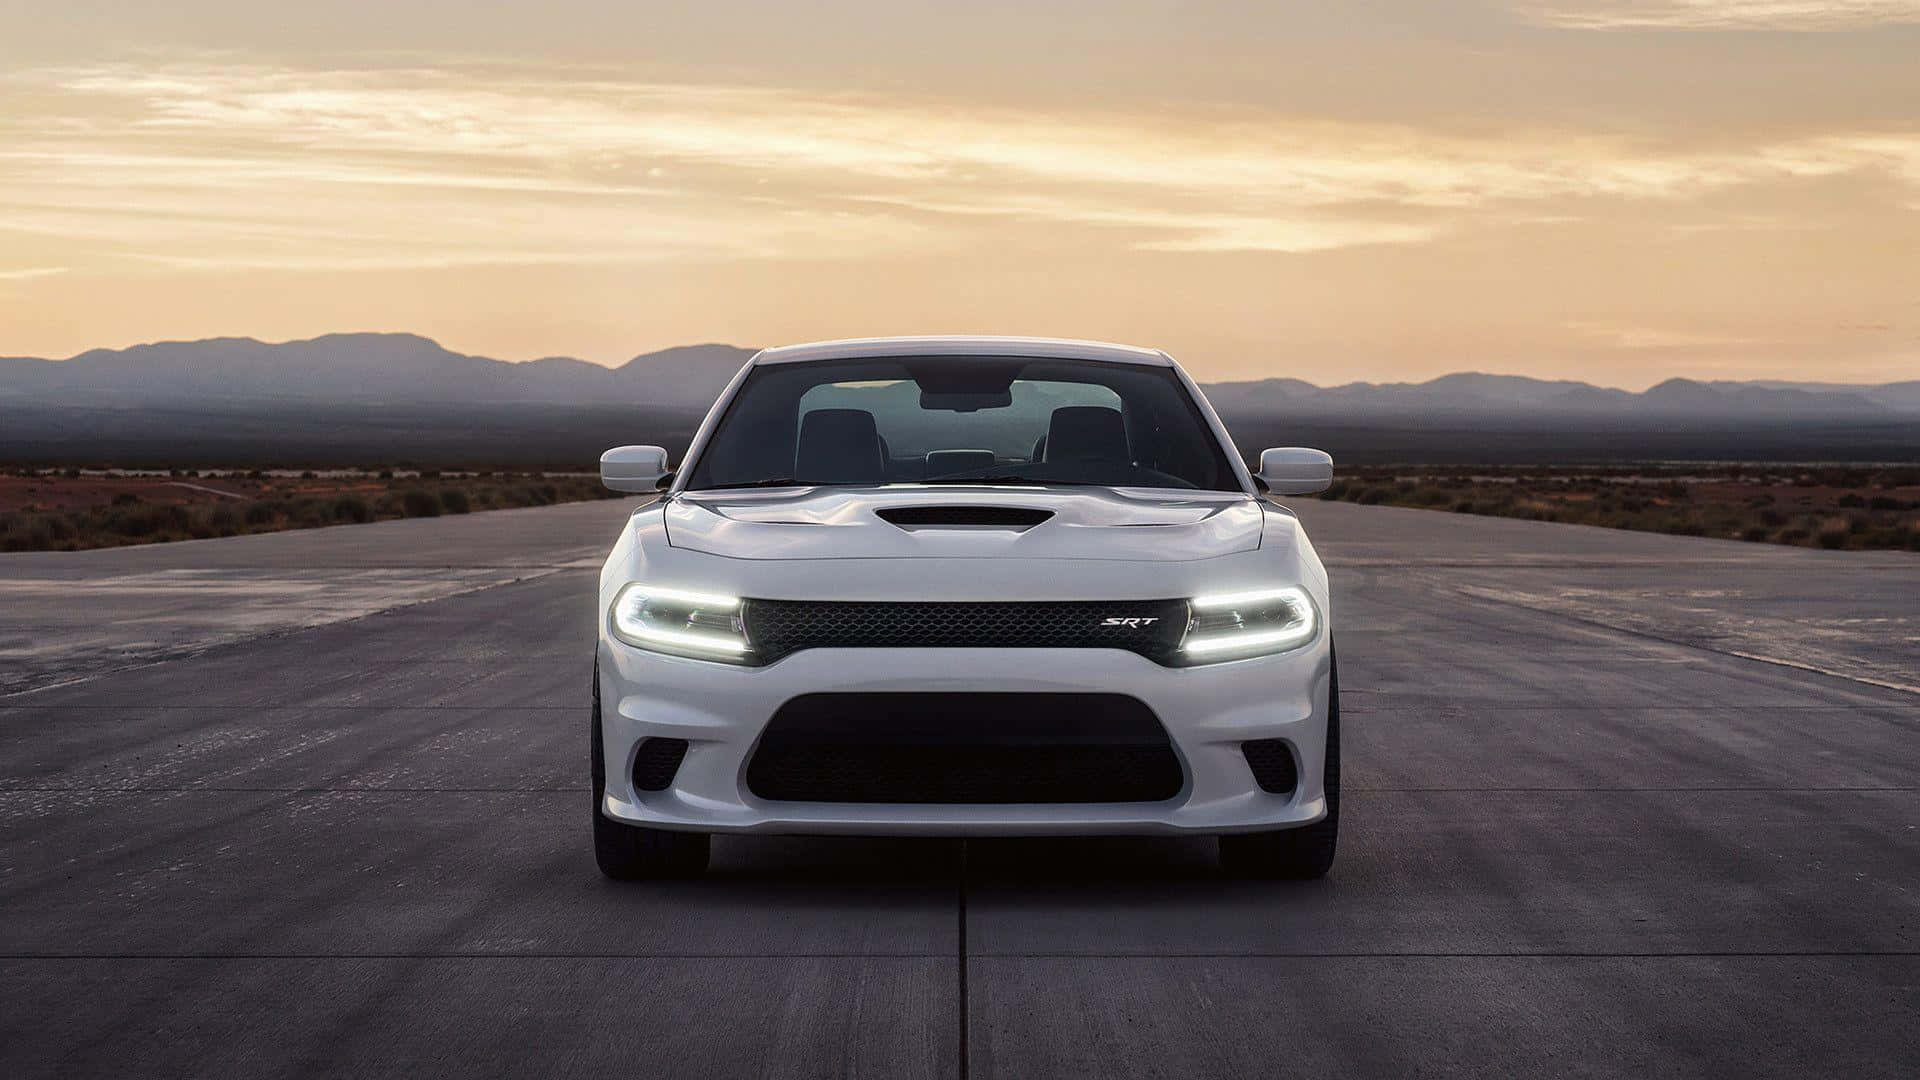 White Dodge Charger S R T Front View Wallpaper